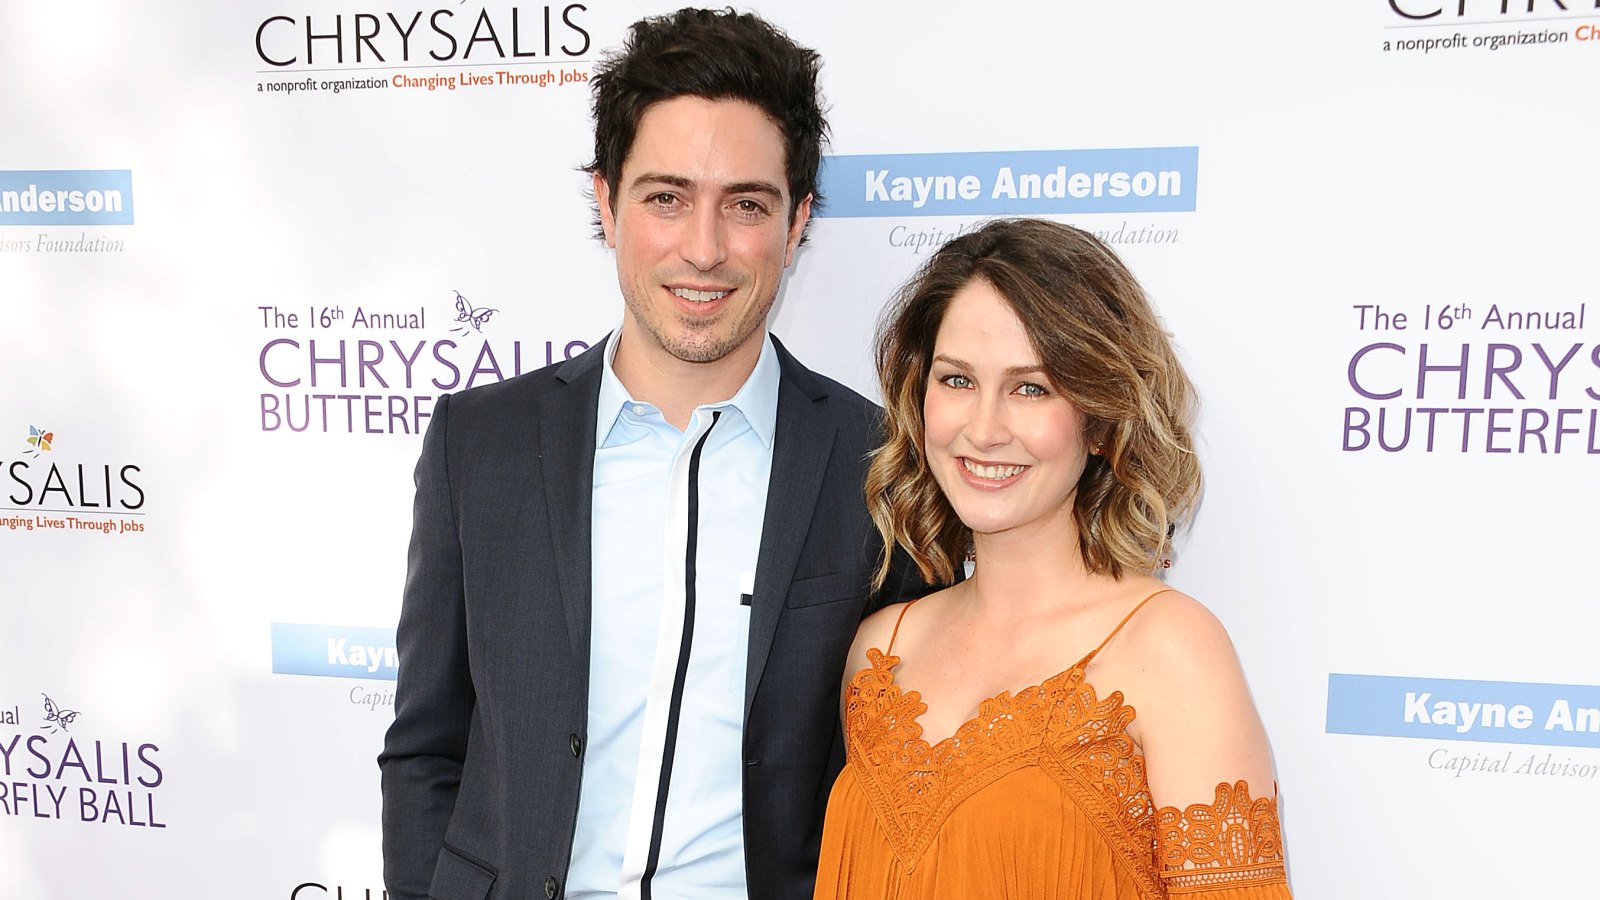 Ben Feldman Accidentally Announces That Wife Michelle Gave Birth to Baby No 2 Chrysalis Butterfly Ball